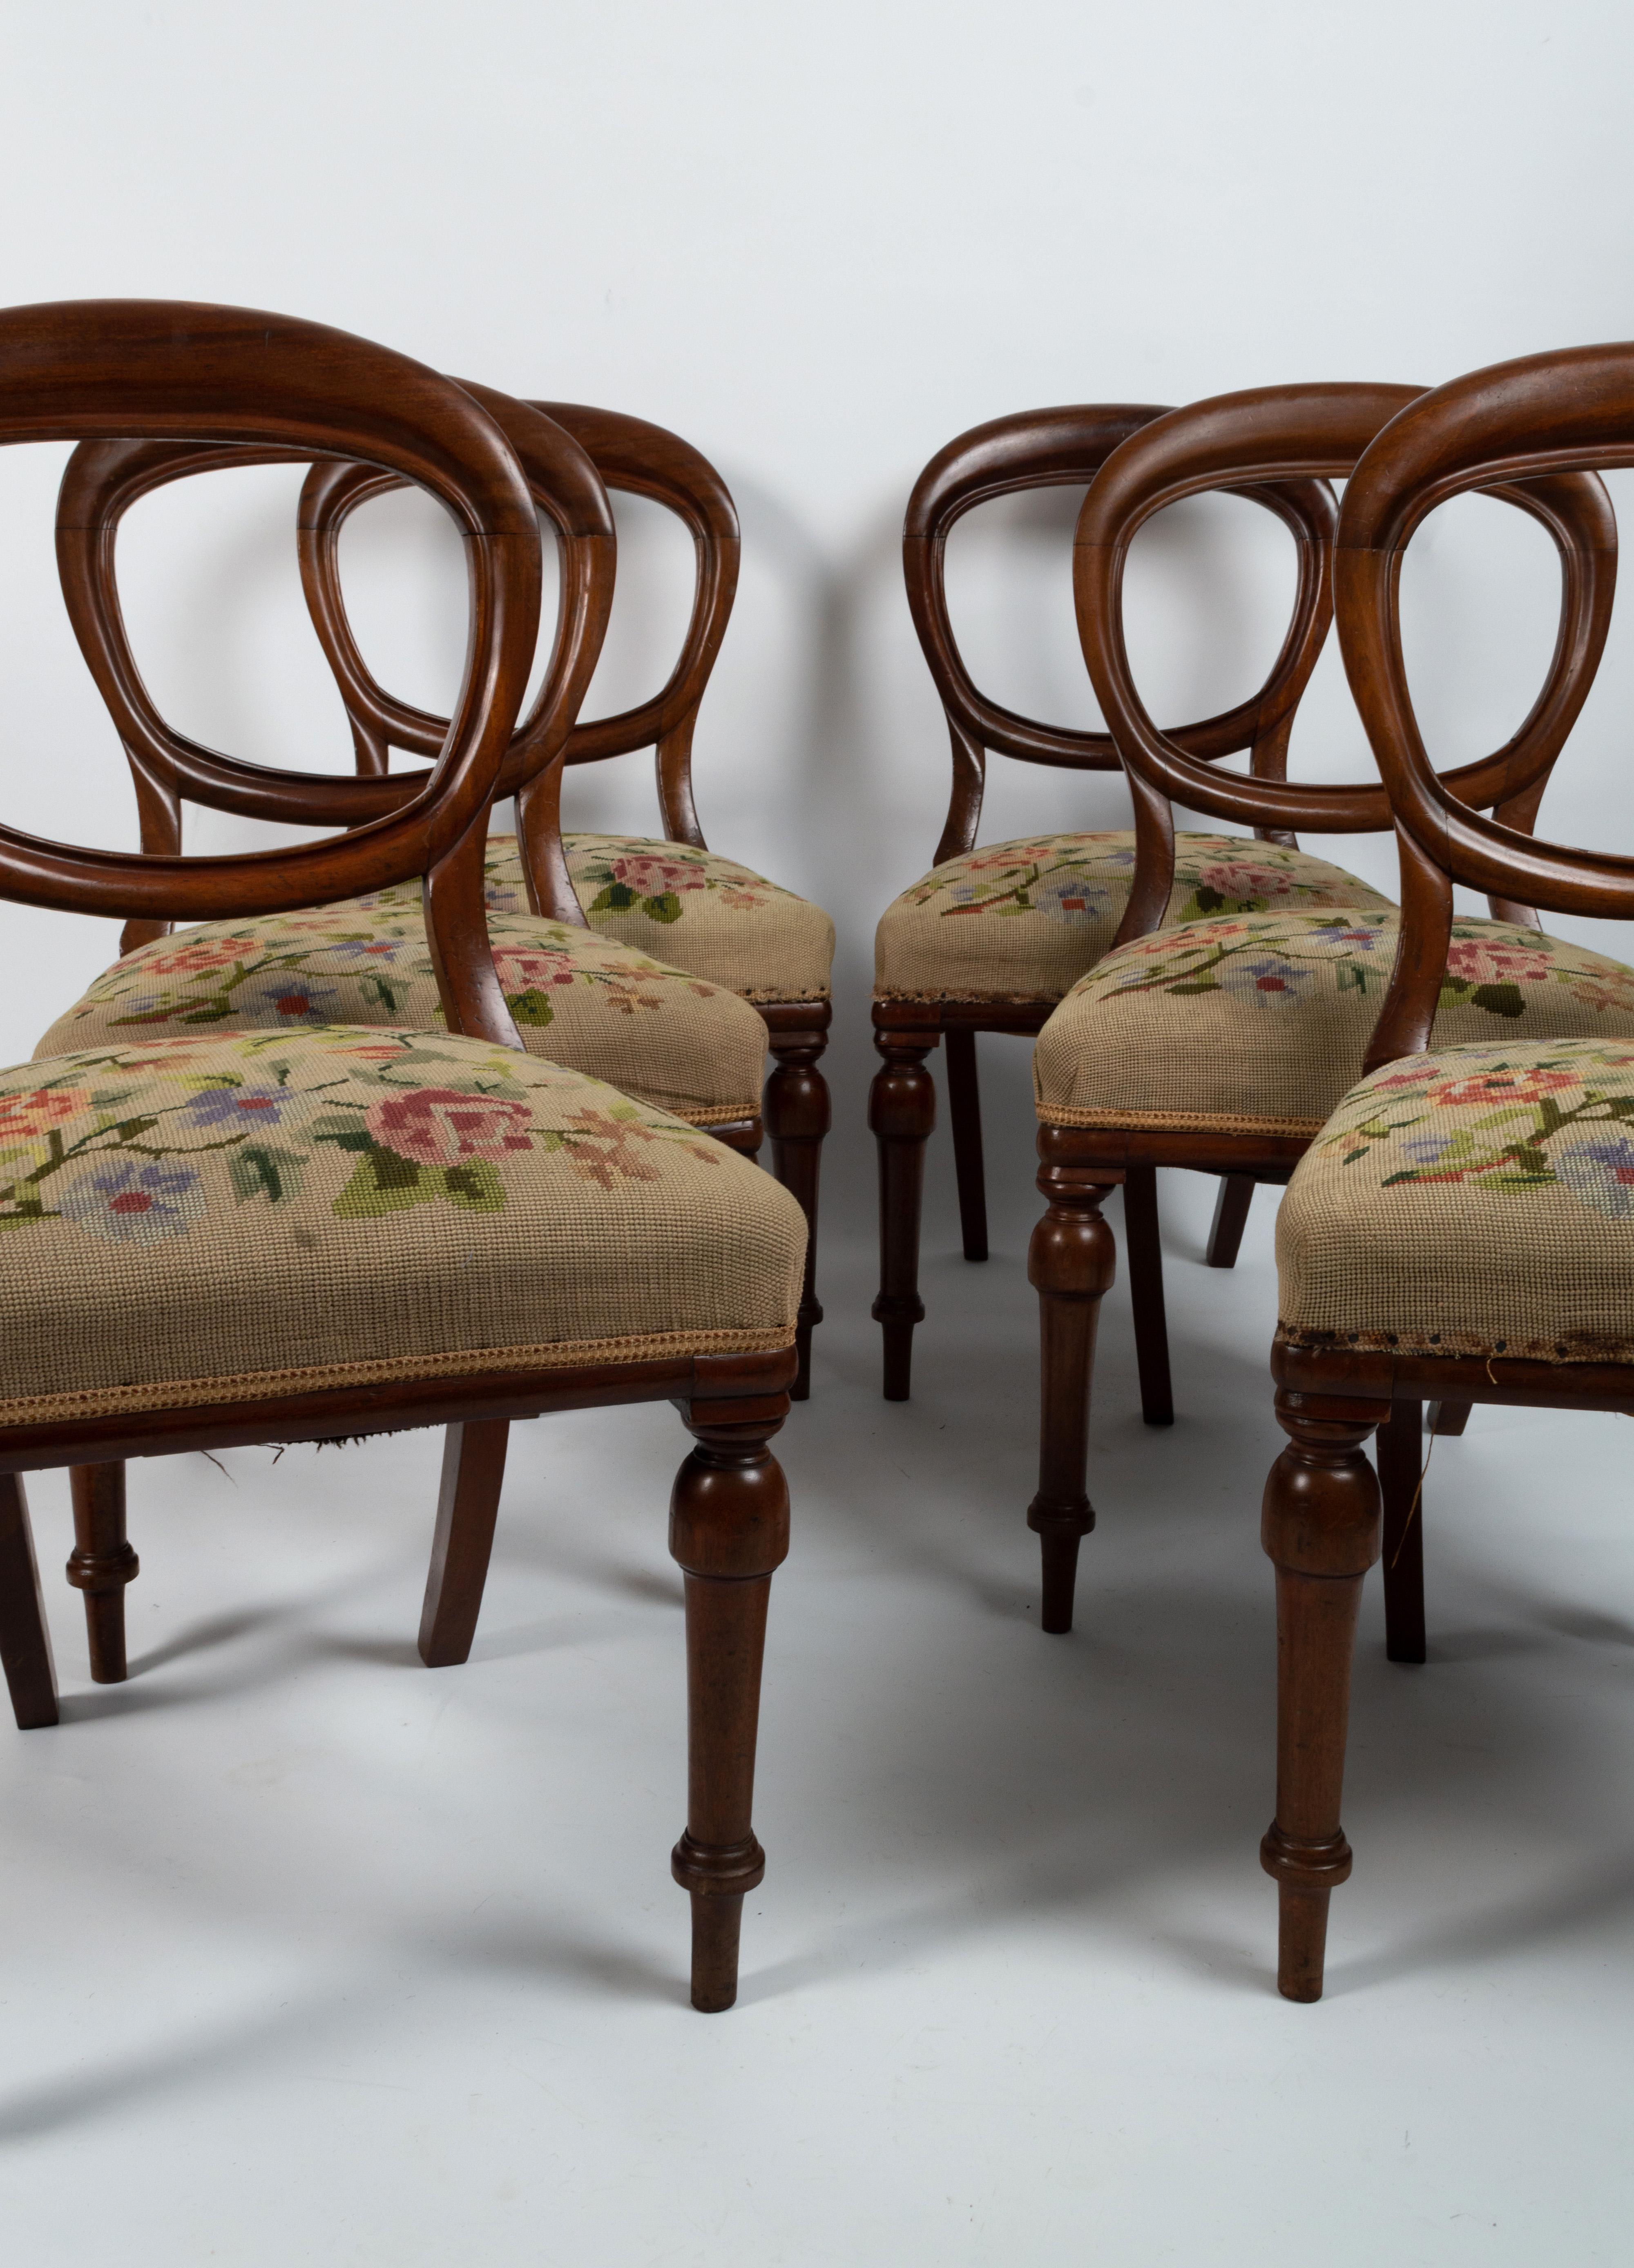 Set of six Antique English 19th century mahogany balloon back chairs, circa 1860

A good example of 19th century design.

In very good condition with expected signs of wear commensurate of age. The upholstered seats are in useable condition with